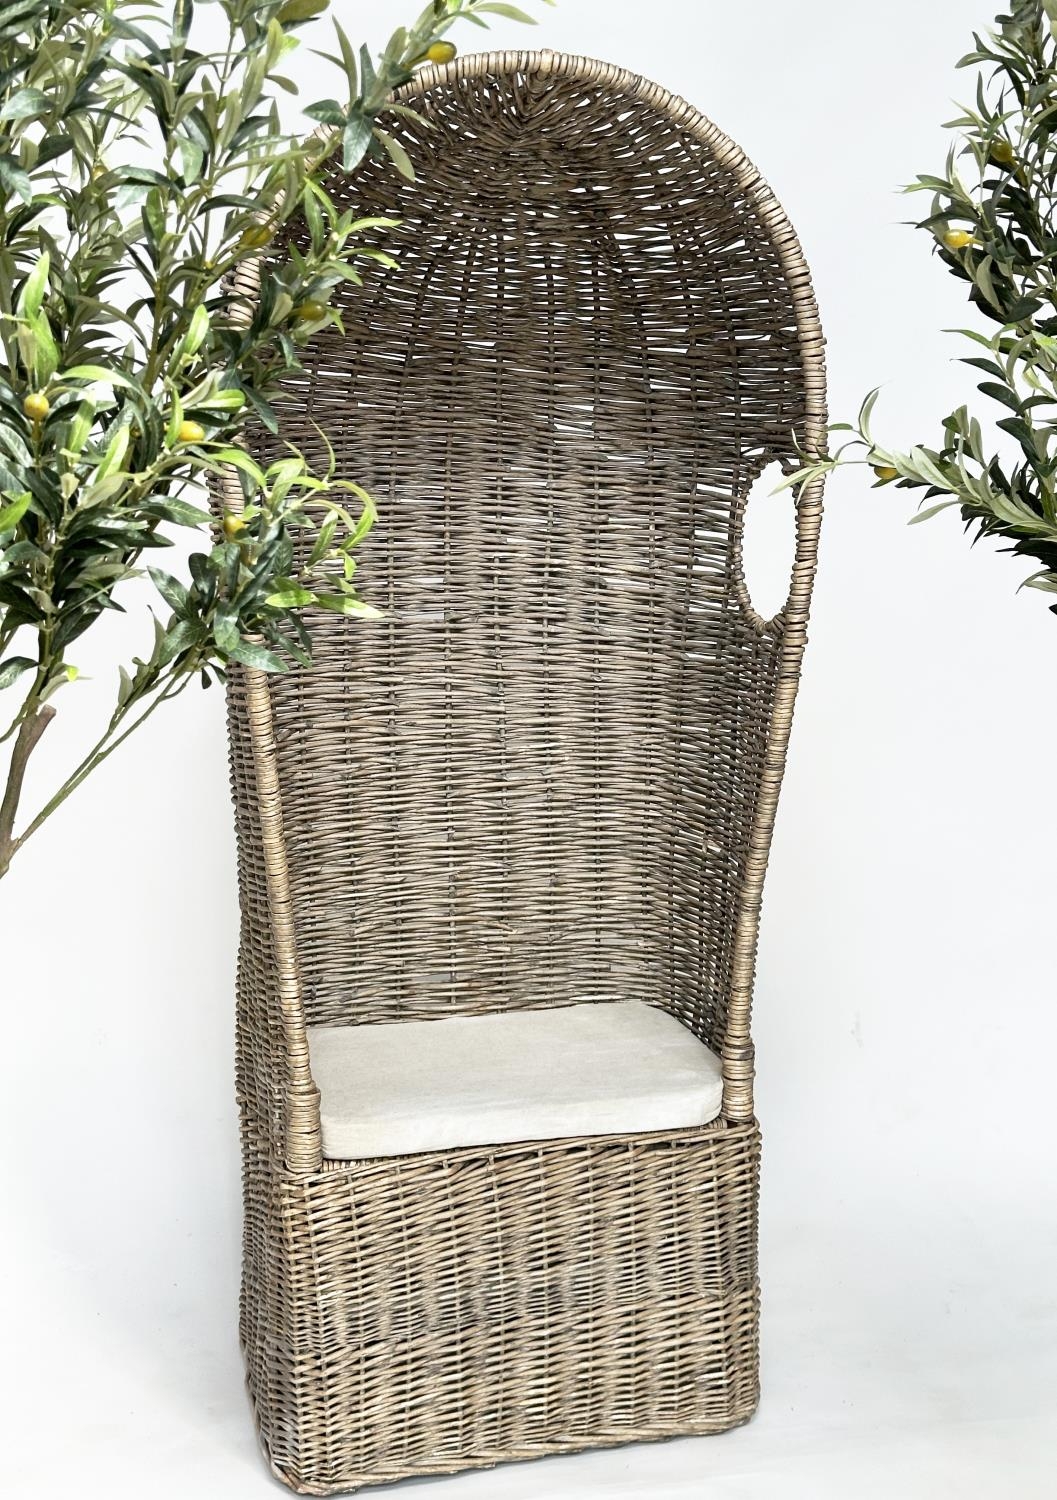 ORANGERY CHAIR, porters style rattan framed and wicker woven panelled with viewing openings, 179cm H - Image 4 of 13